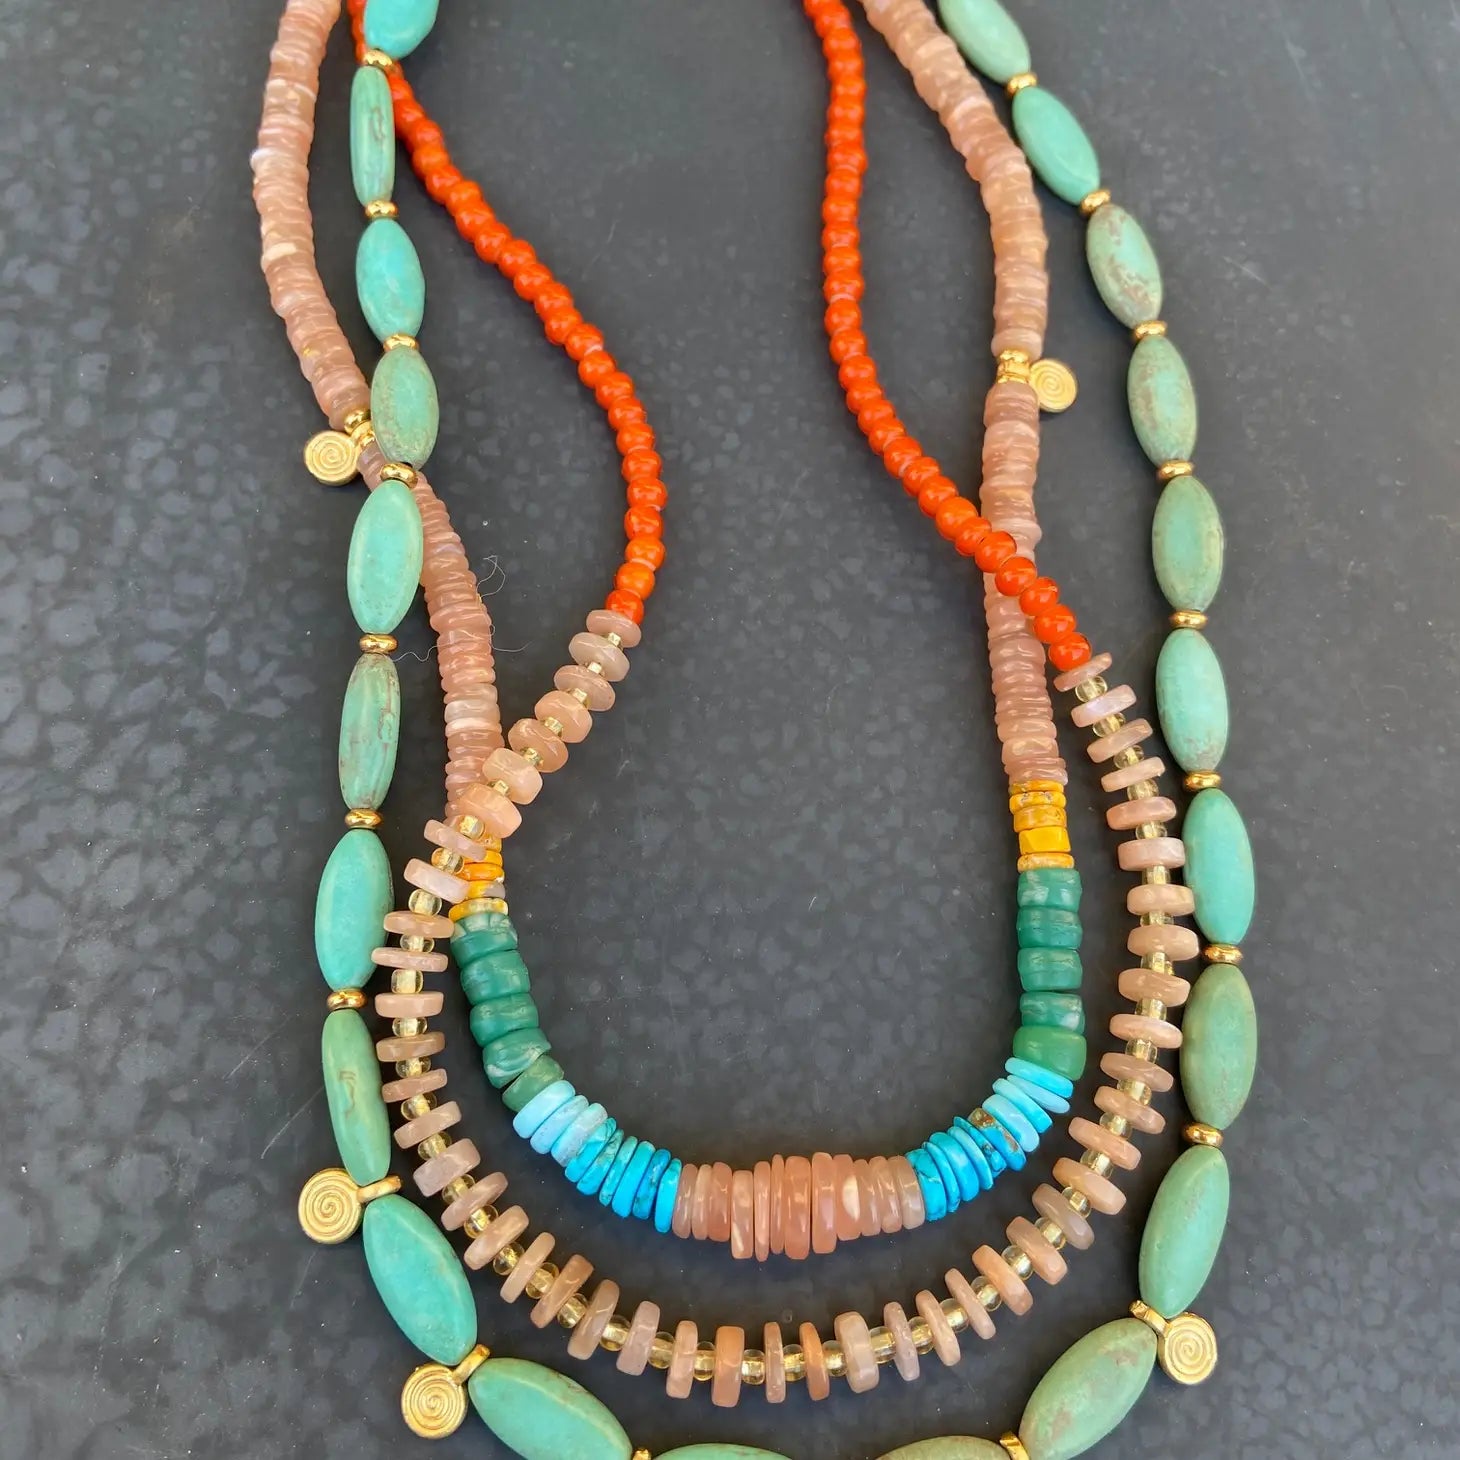 California Summers Necklace